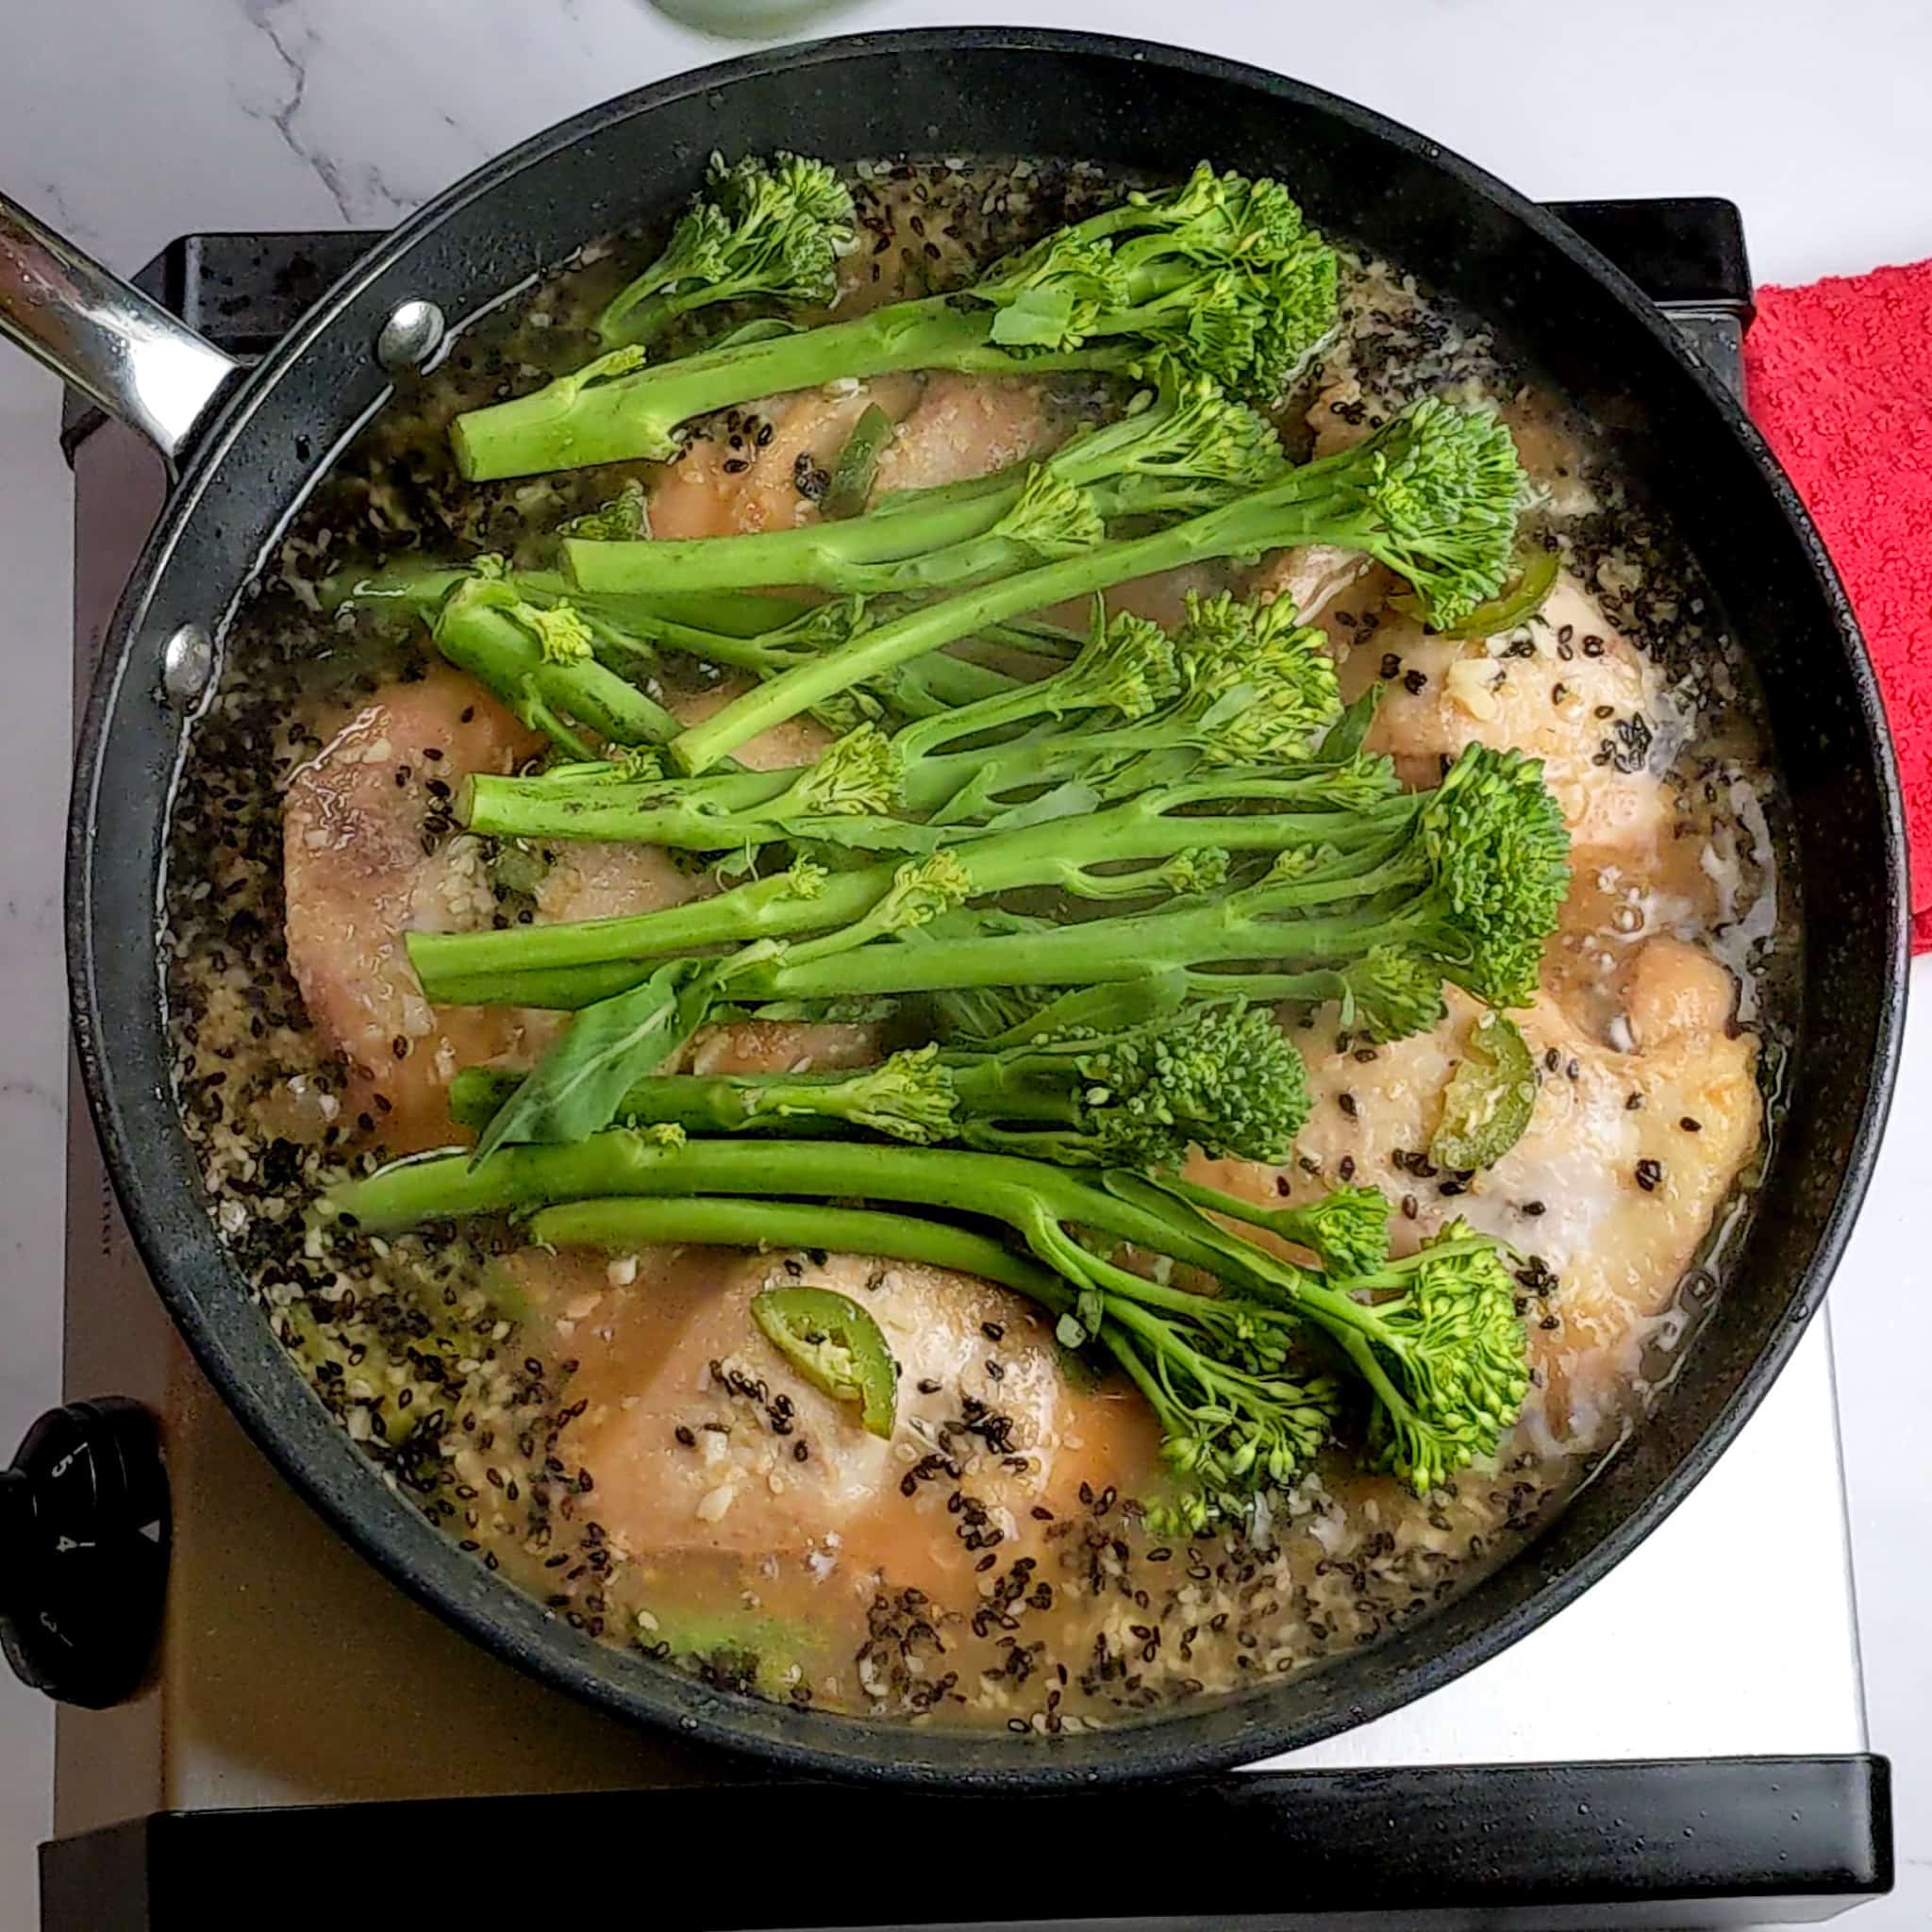 raw broccolini sitting on top of the seared sesame chicken in the seasoned broth in a non-stick frying pan